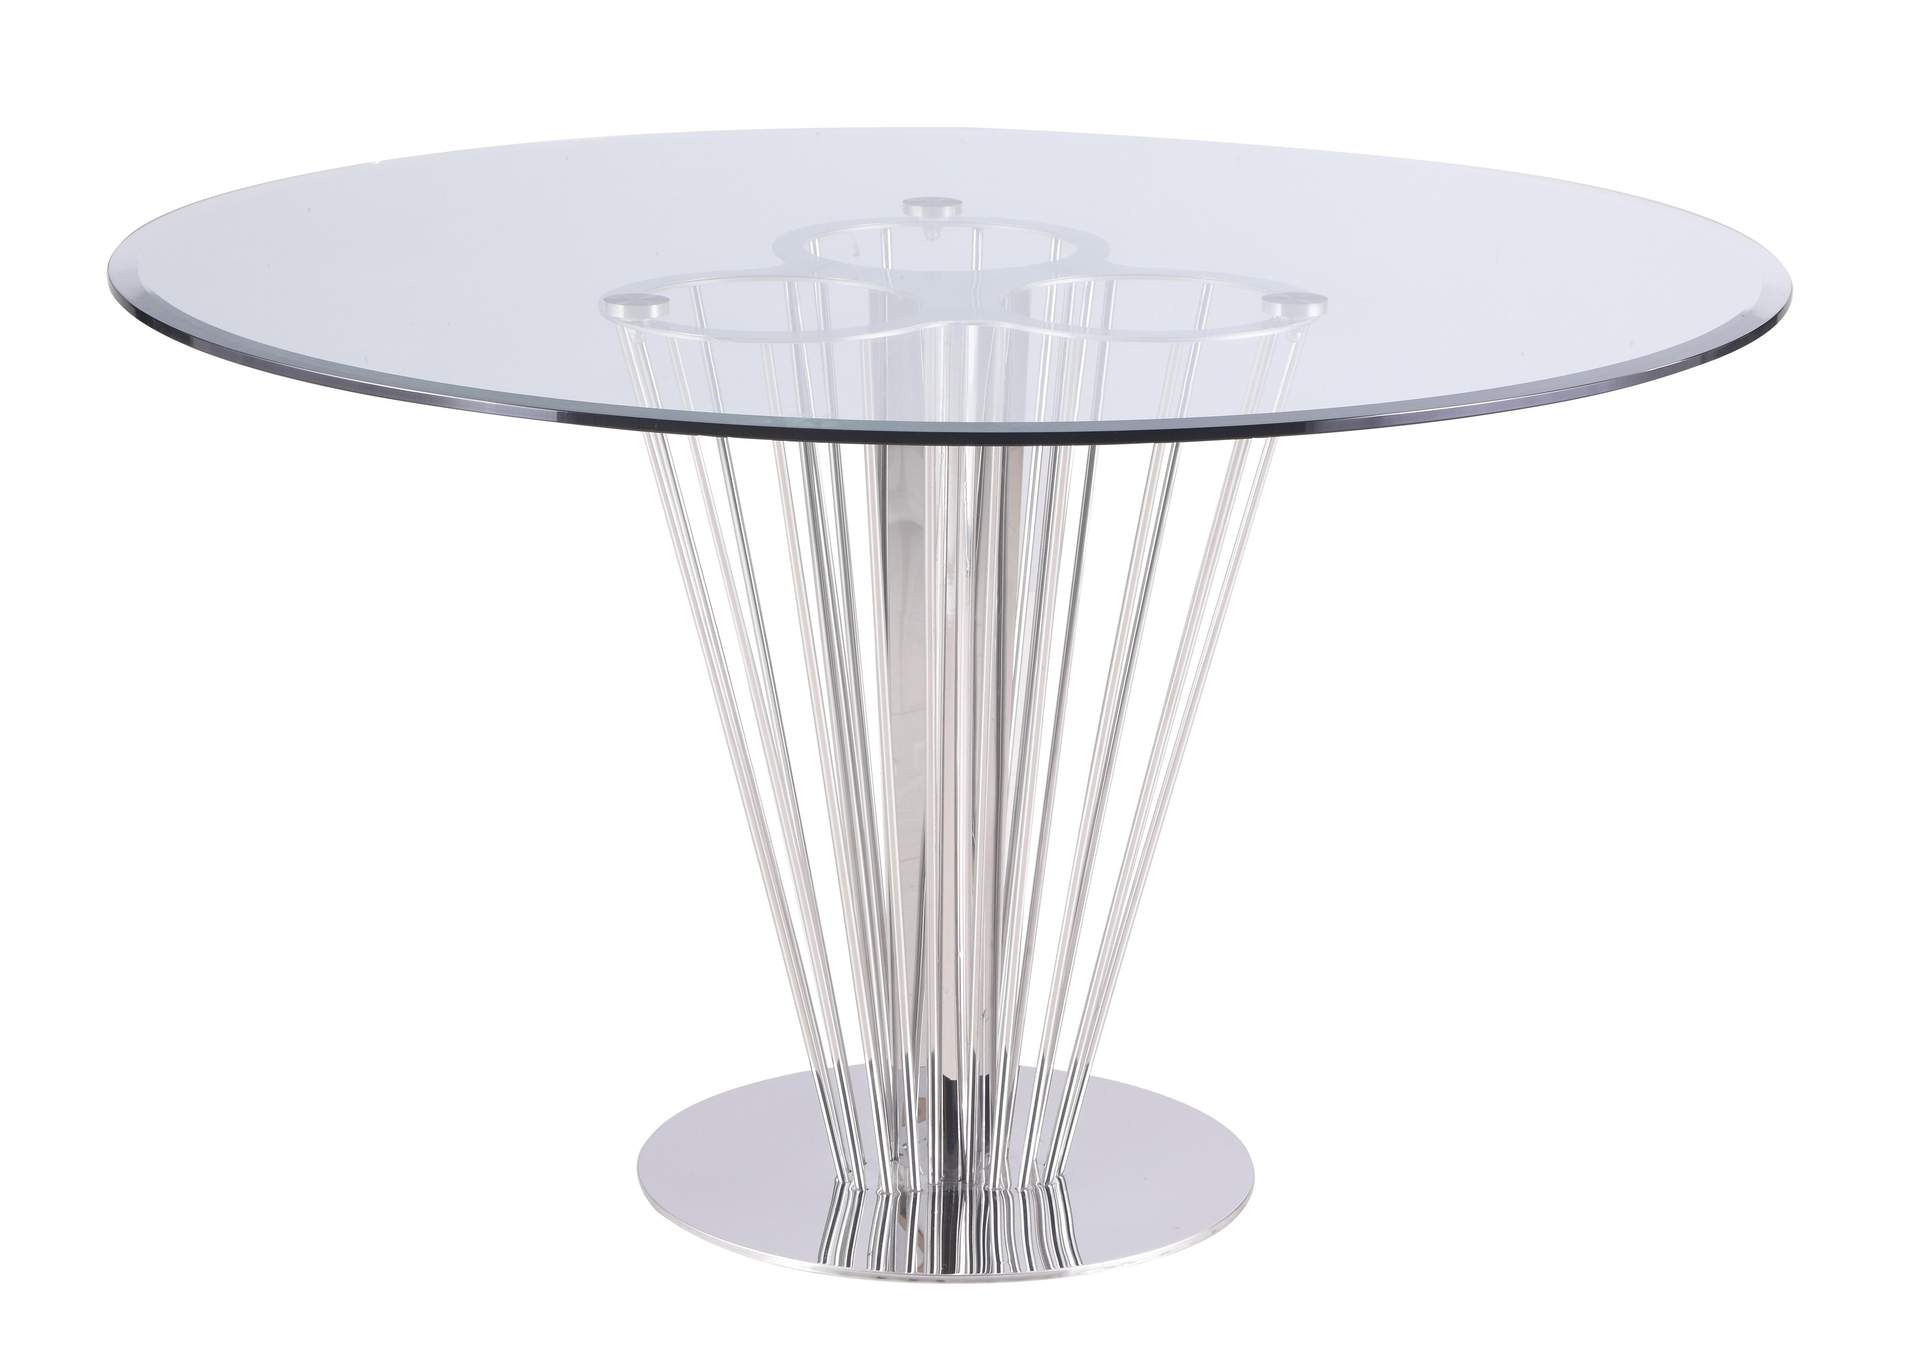 Contemporary Round Glass Dining Table,Chintaly Imports